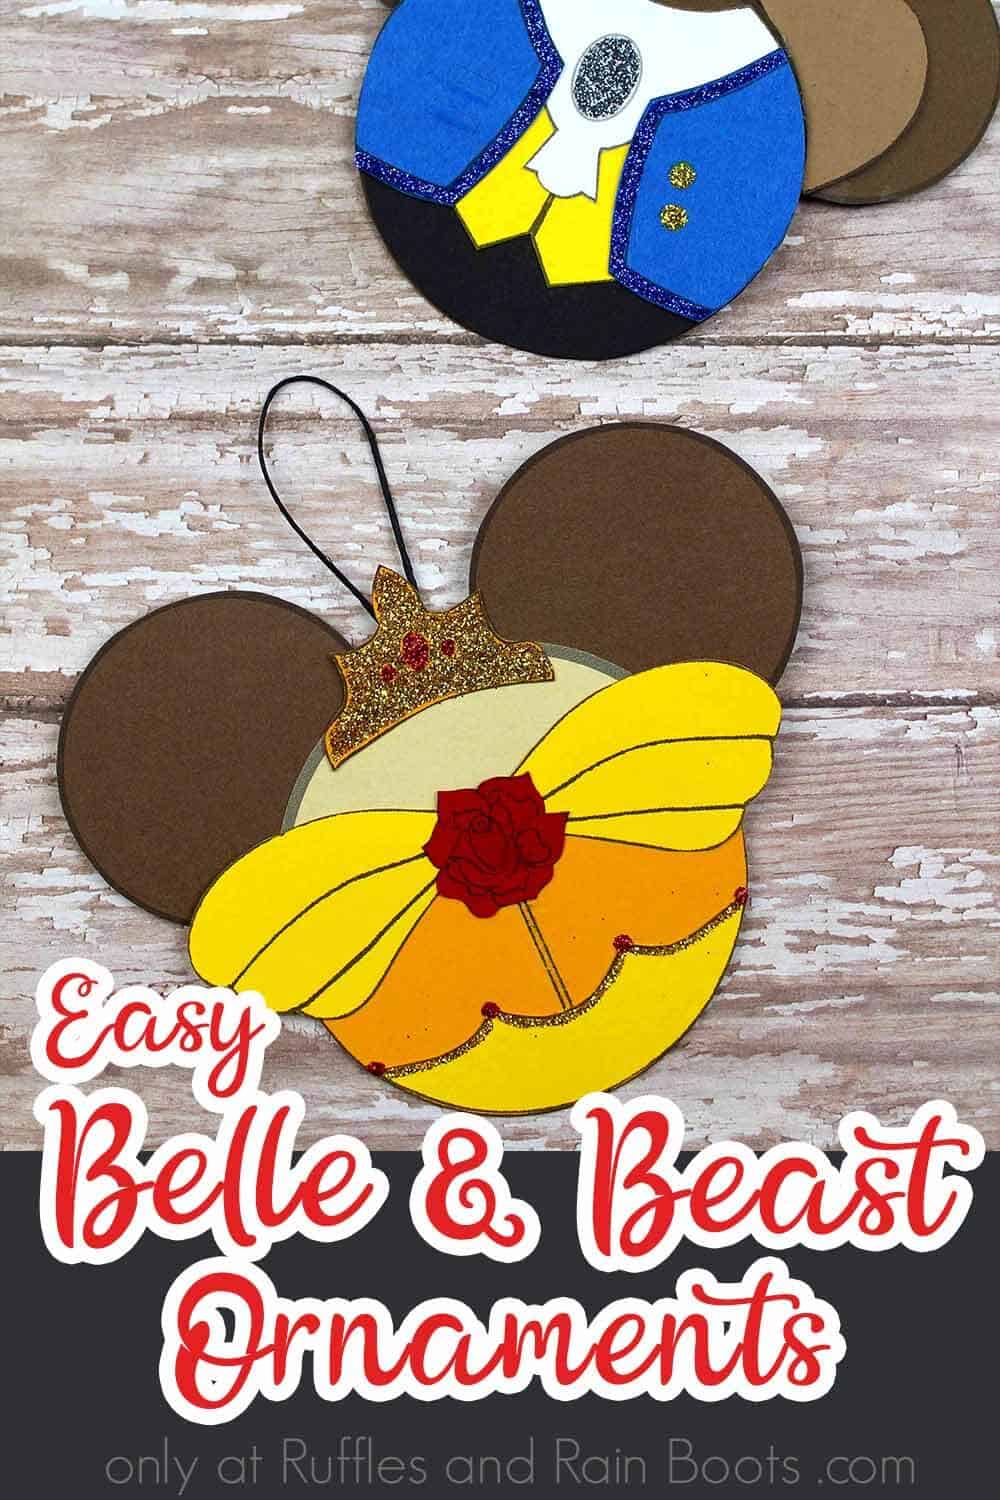 princess belle ornaments on a wood background with text which reads easy belle and beast ornaments